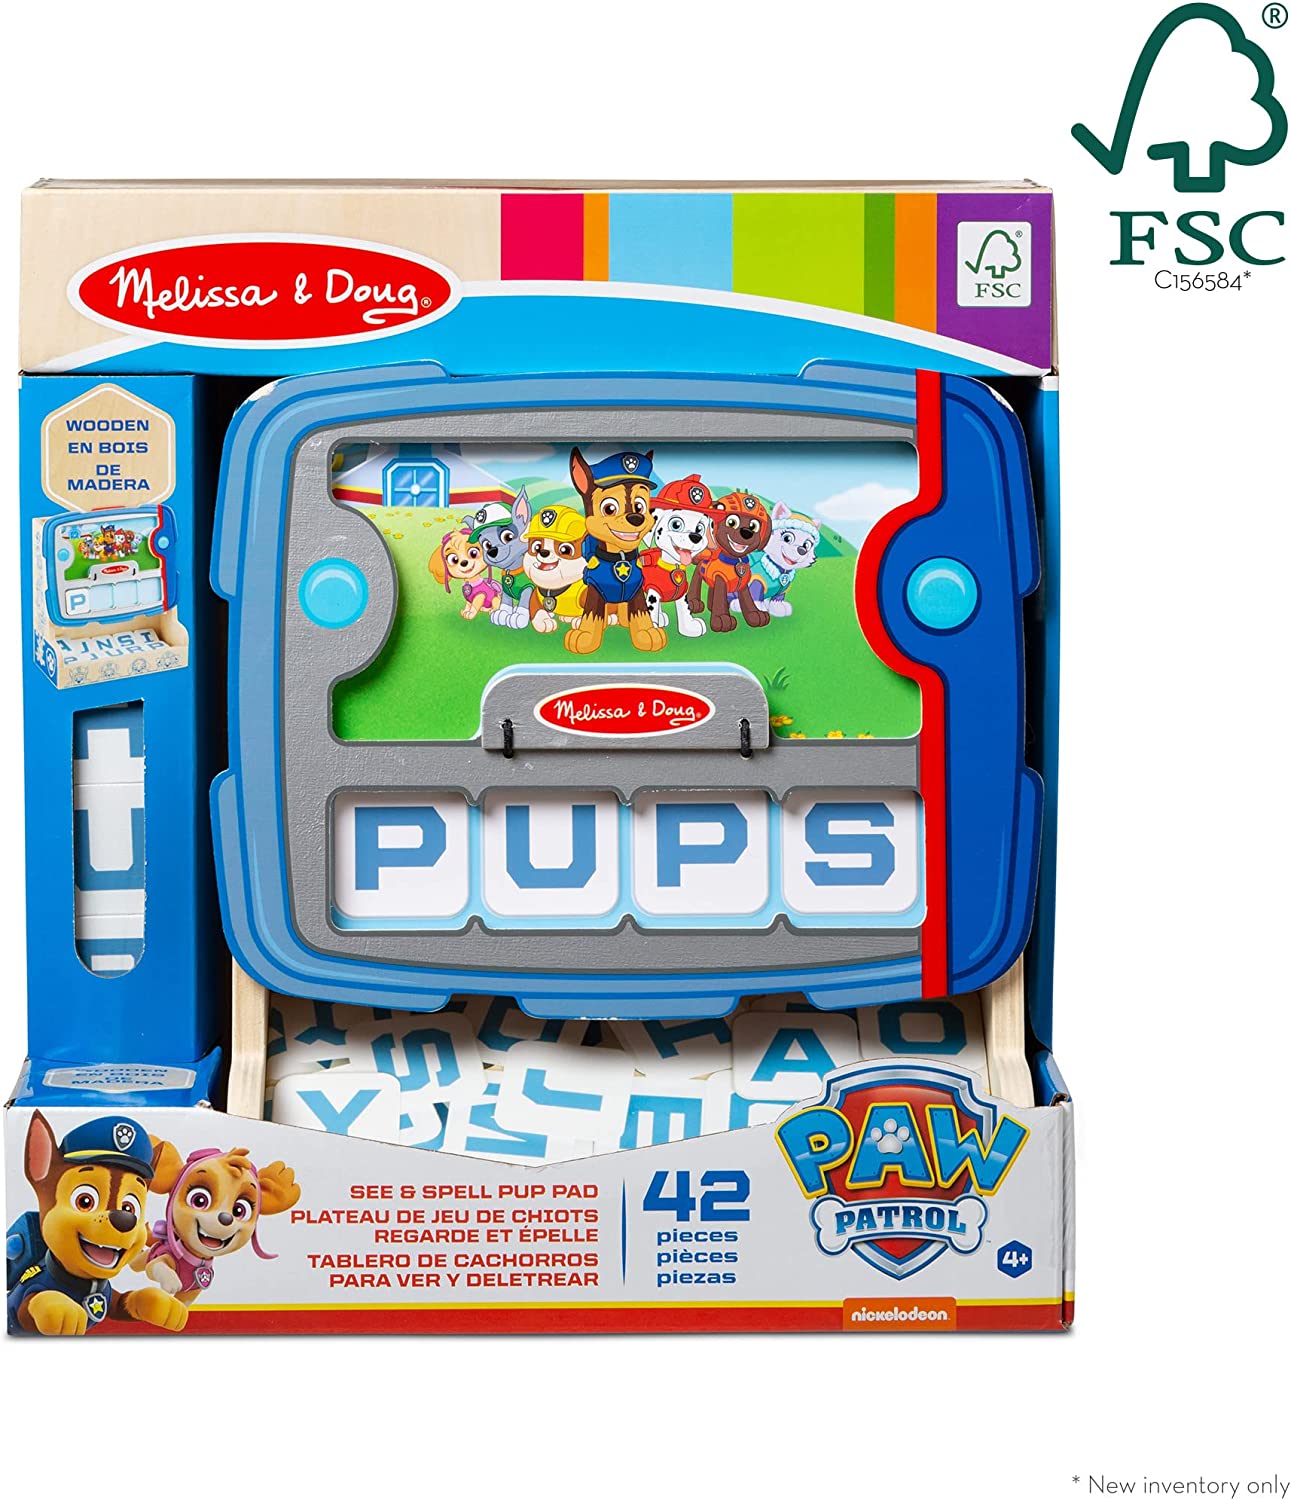 https://bigbigmart.com/wp-content/uploads/2023/02/Melissa-Doug-PAW-Patrol-Wooden-See-Spell-Pup-Pad-Game-PAW-Patrol-Spelling-Activity-PAW-Patrol-Toys-Word-Games-For-Kids-Ages-4-FSC-Certified-Materials6.jpg